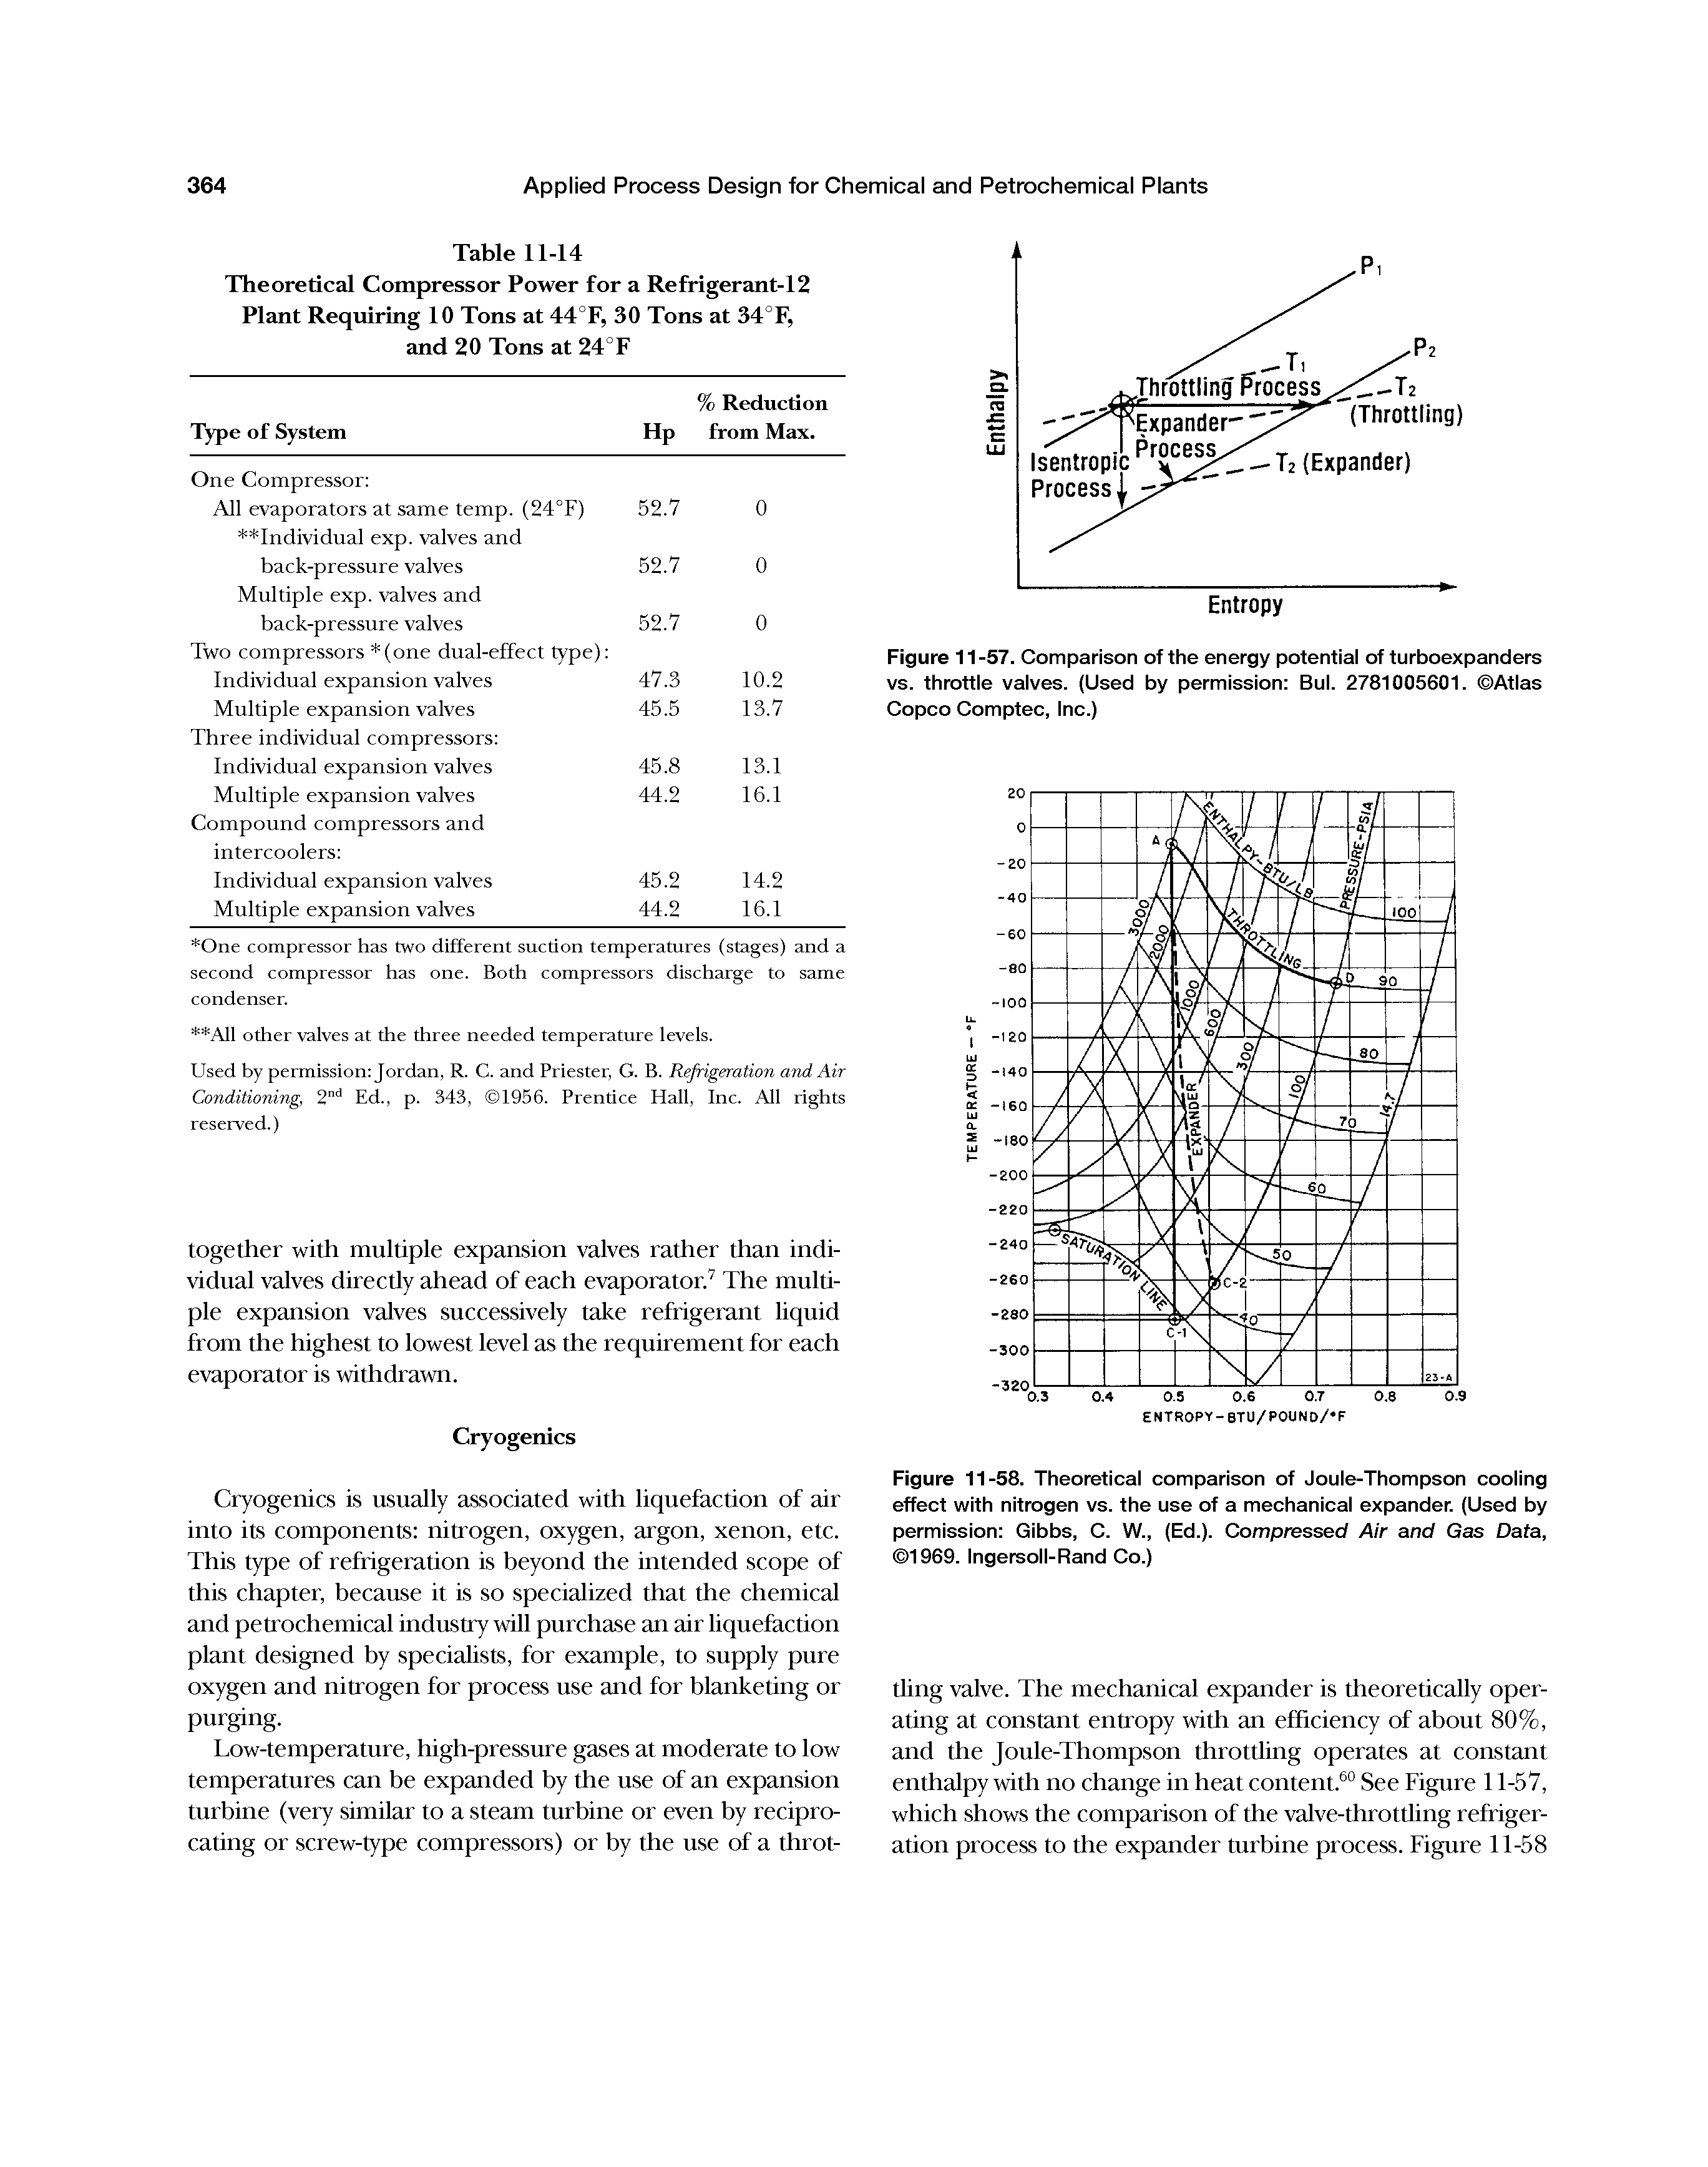 Figure 11-58. Theoretical comparison of Joule-Thompson cooling effect with nitrogen vs. the use of a mechanical expander. (Used by permission Gibbs, C. W., (Ed.). Compressed Air and Gas Data, 1969. Ingersoll-Rand Co.)...